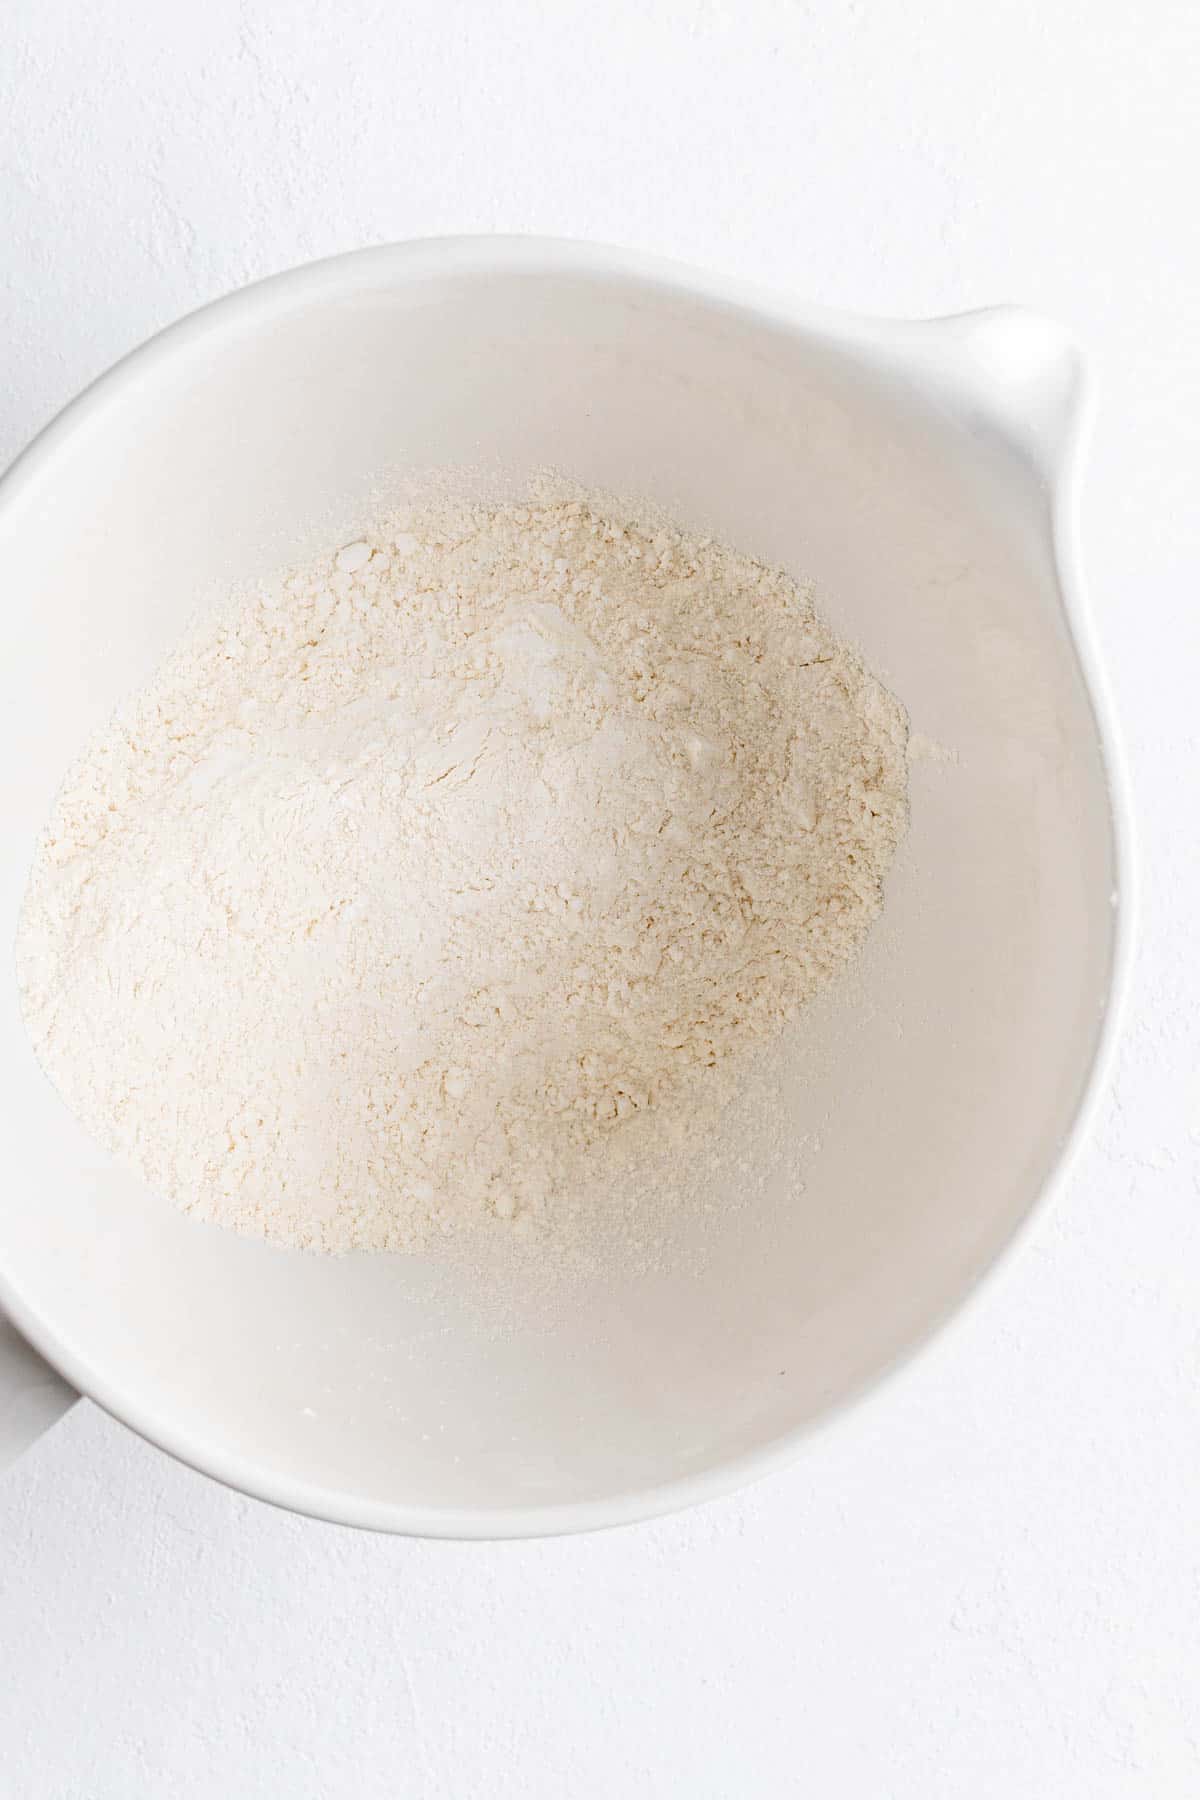 Dry ingredients for shortbread cookie dough in a white mixer bowl on white background.